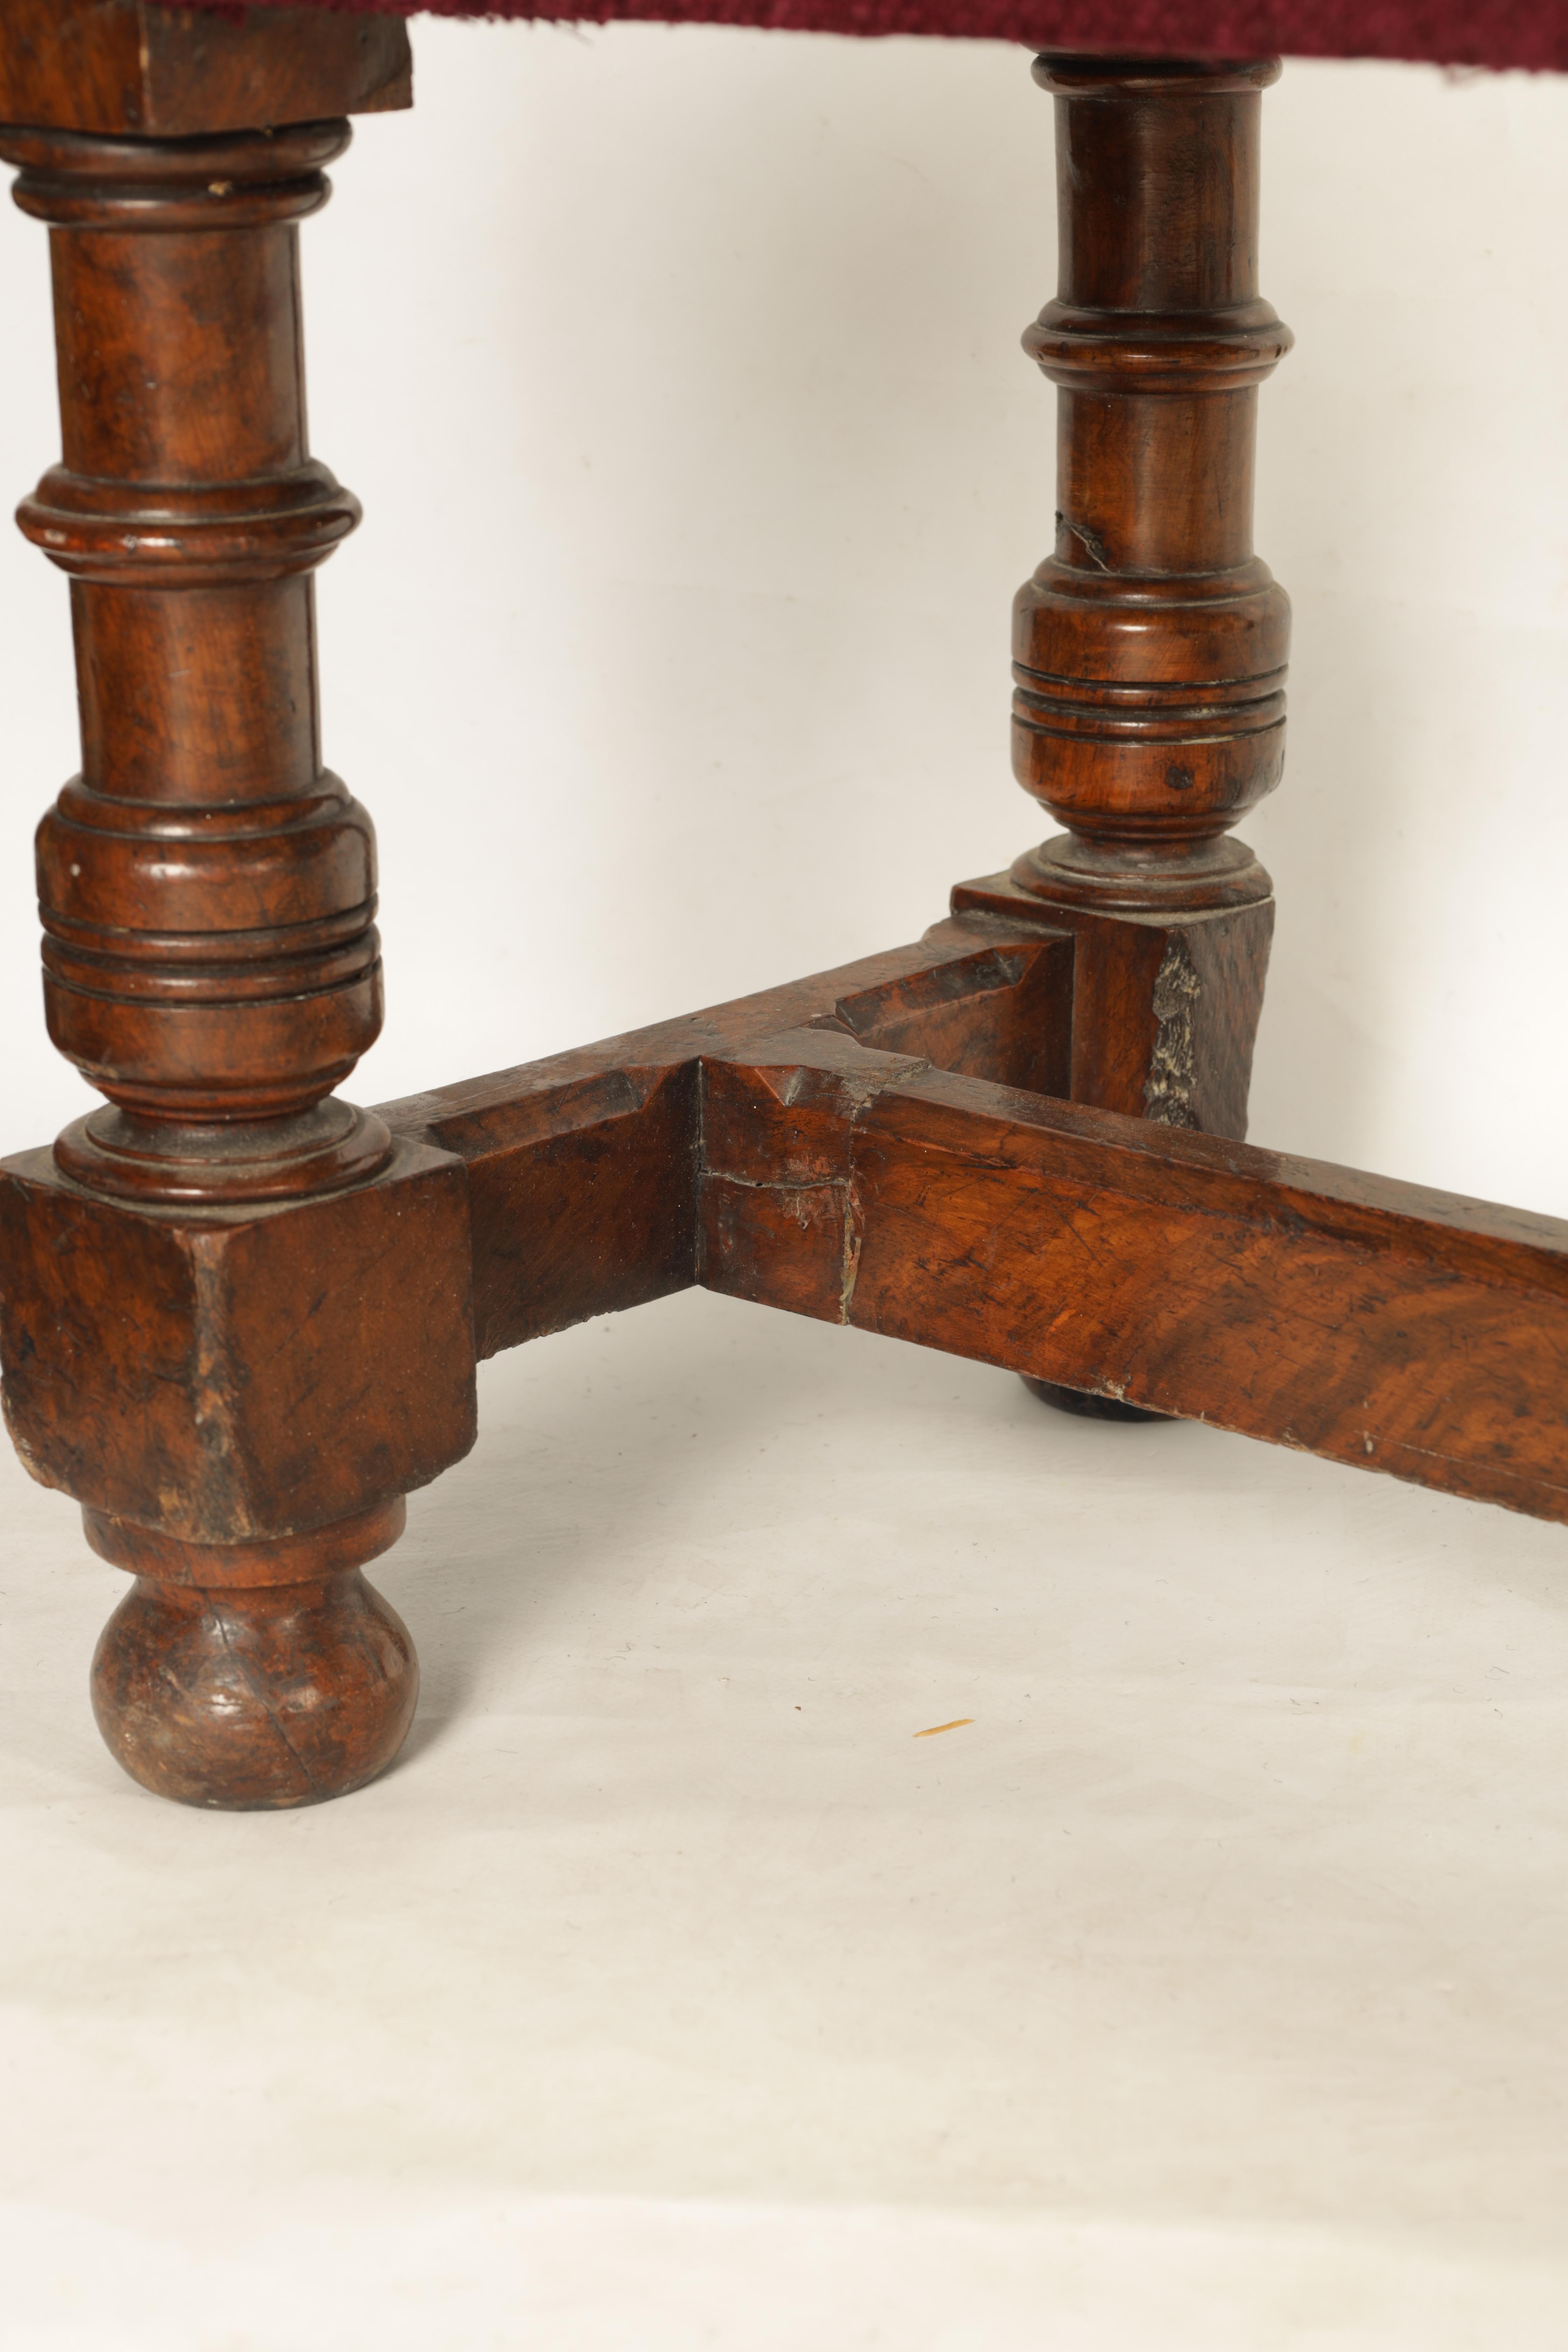 A 19TH CENTURY WALNUT WINDOW SEAT with upholstered top; standing on ring turned legs joined by a H - Image 6 of 7